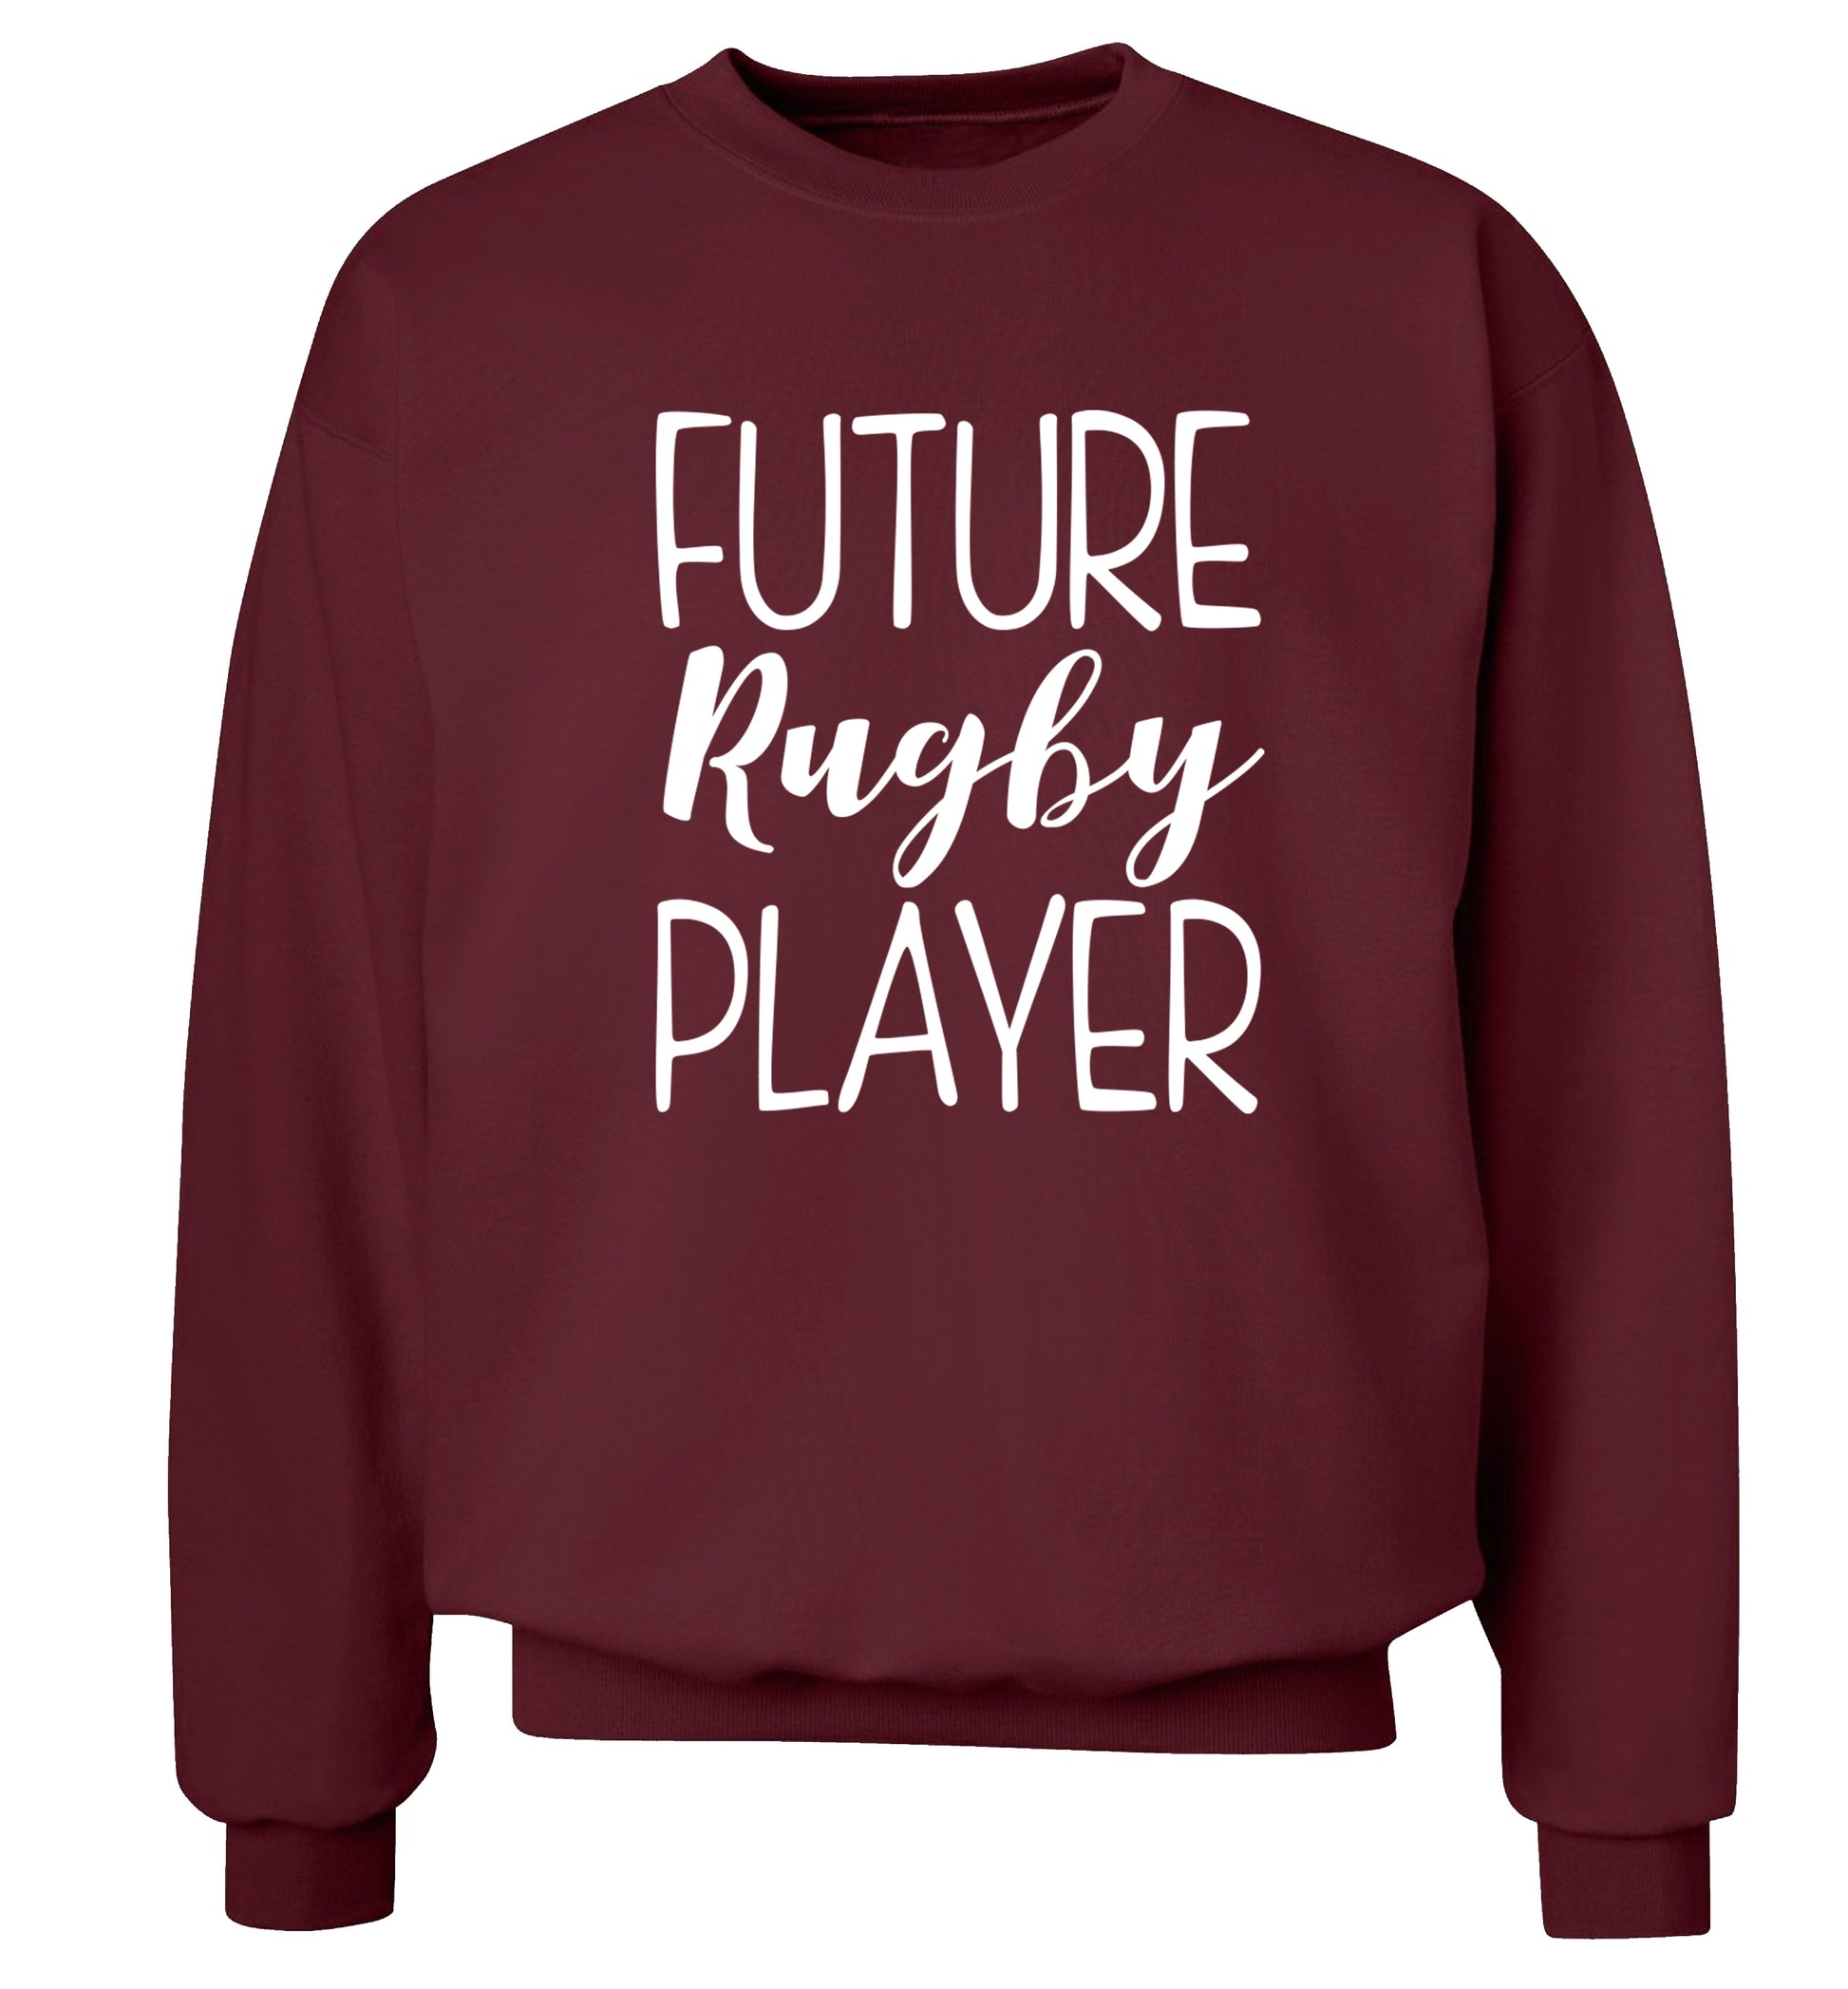 Future rugby player Adult's unisex maroon Sweater 2XL